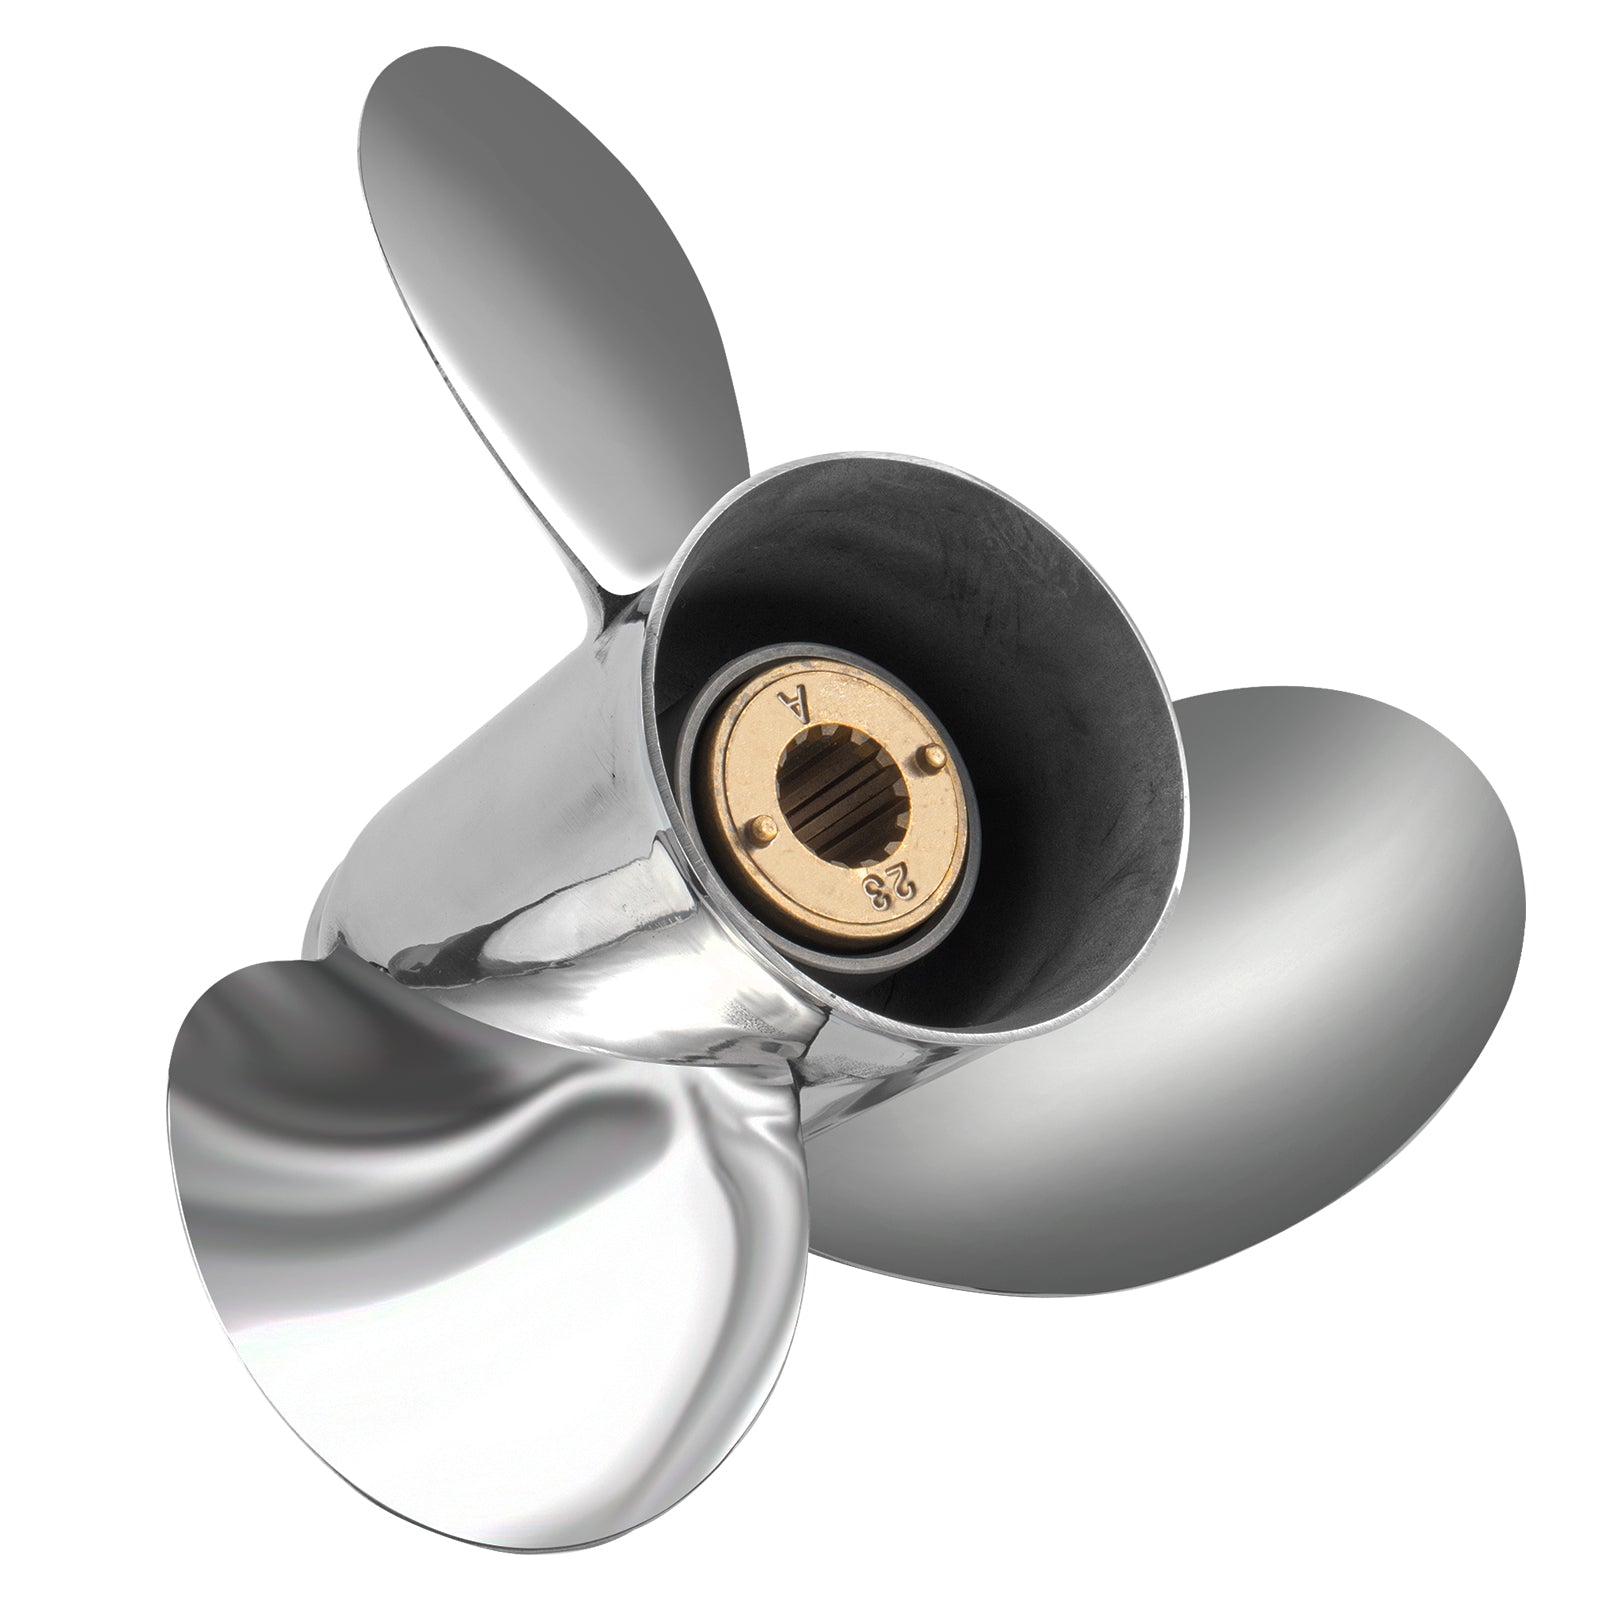 OEM Upgrade  10.25 x 15 Veageance Quicksilver Style Propeller, Parts No. 48-855862A46, for Mercury Outboard 25-70 HP ,13 Spline Tooth,RH